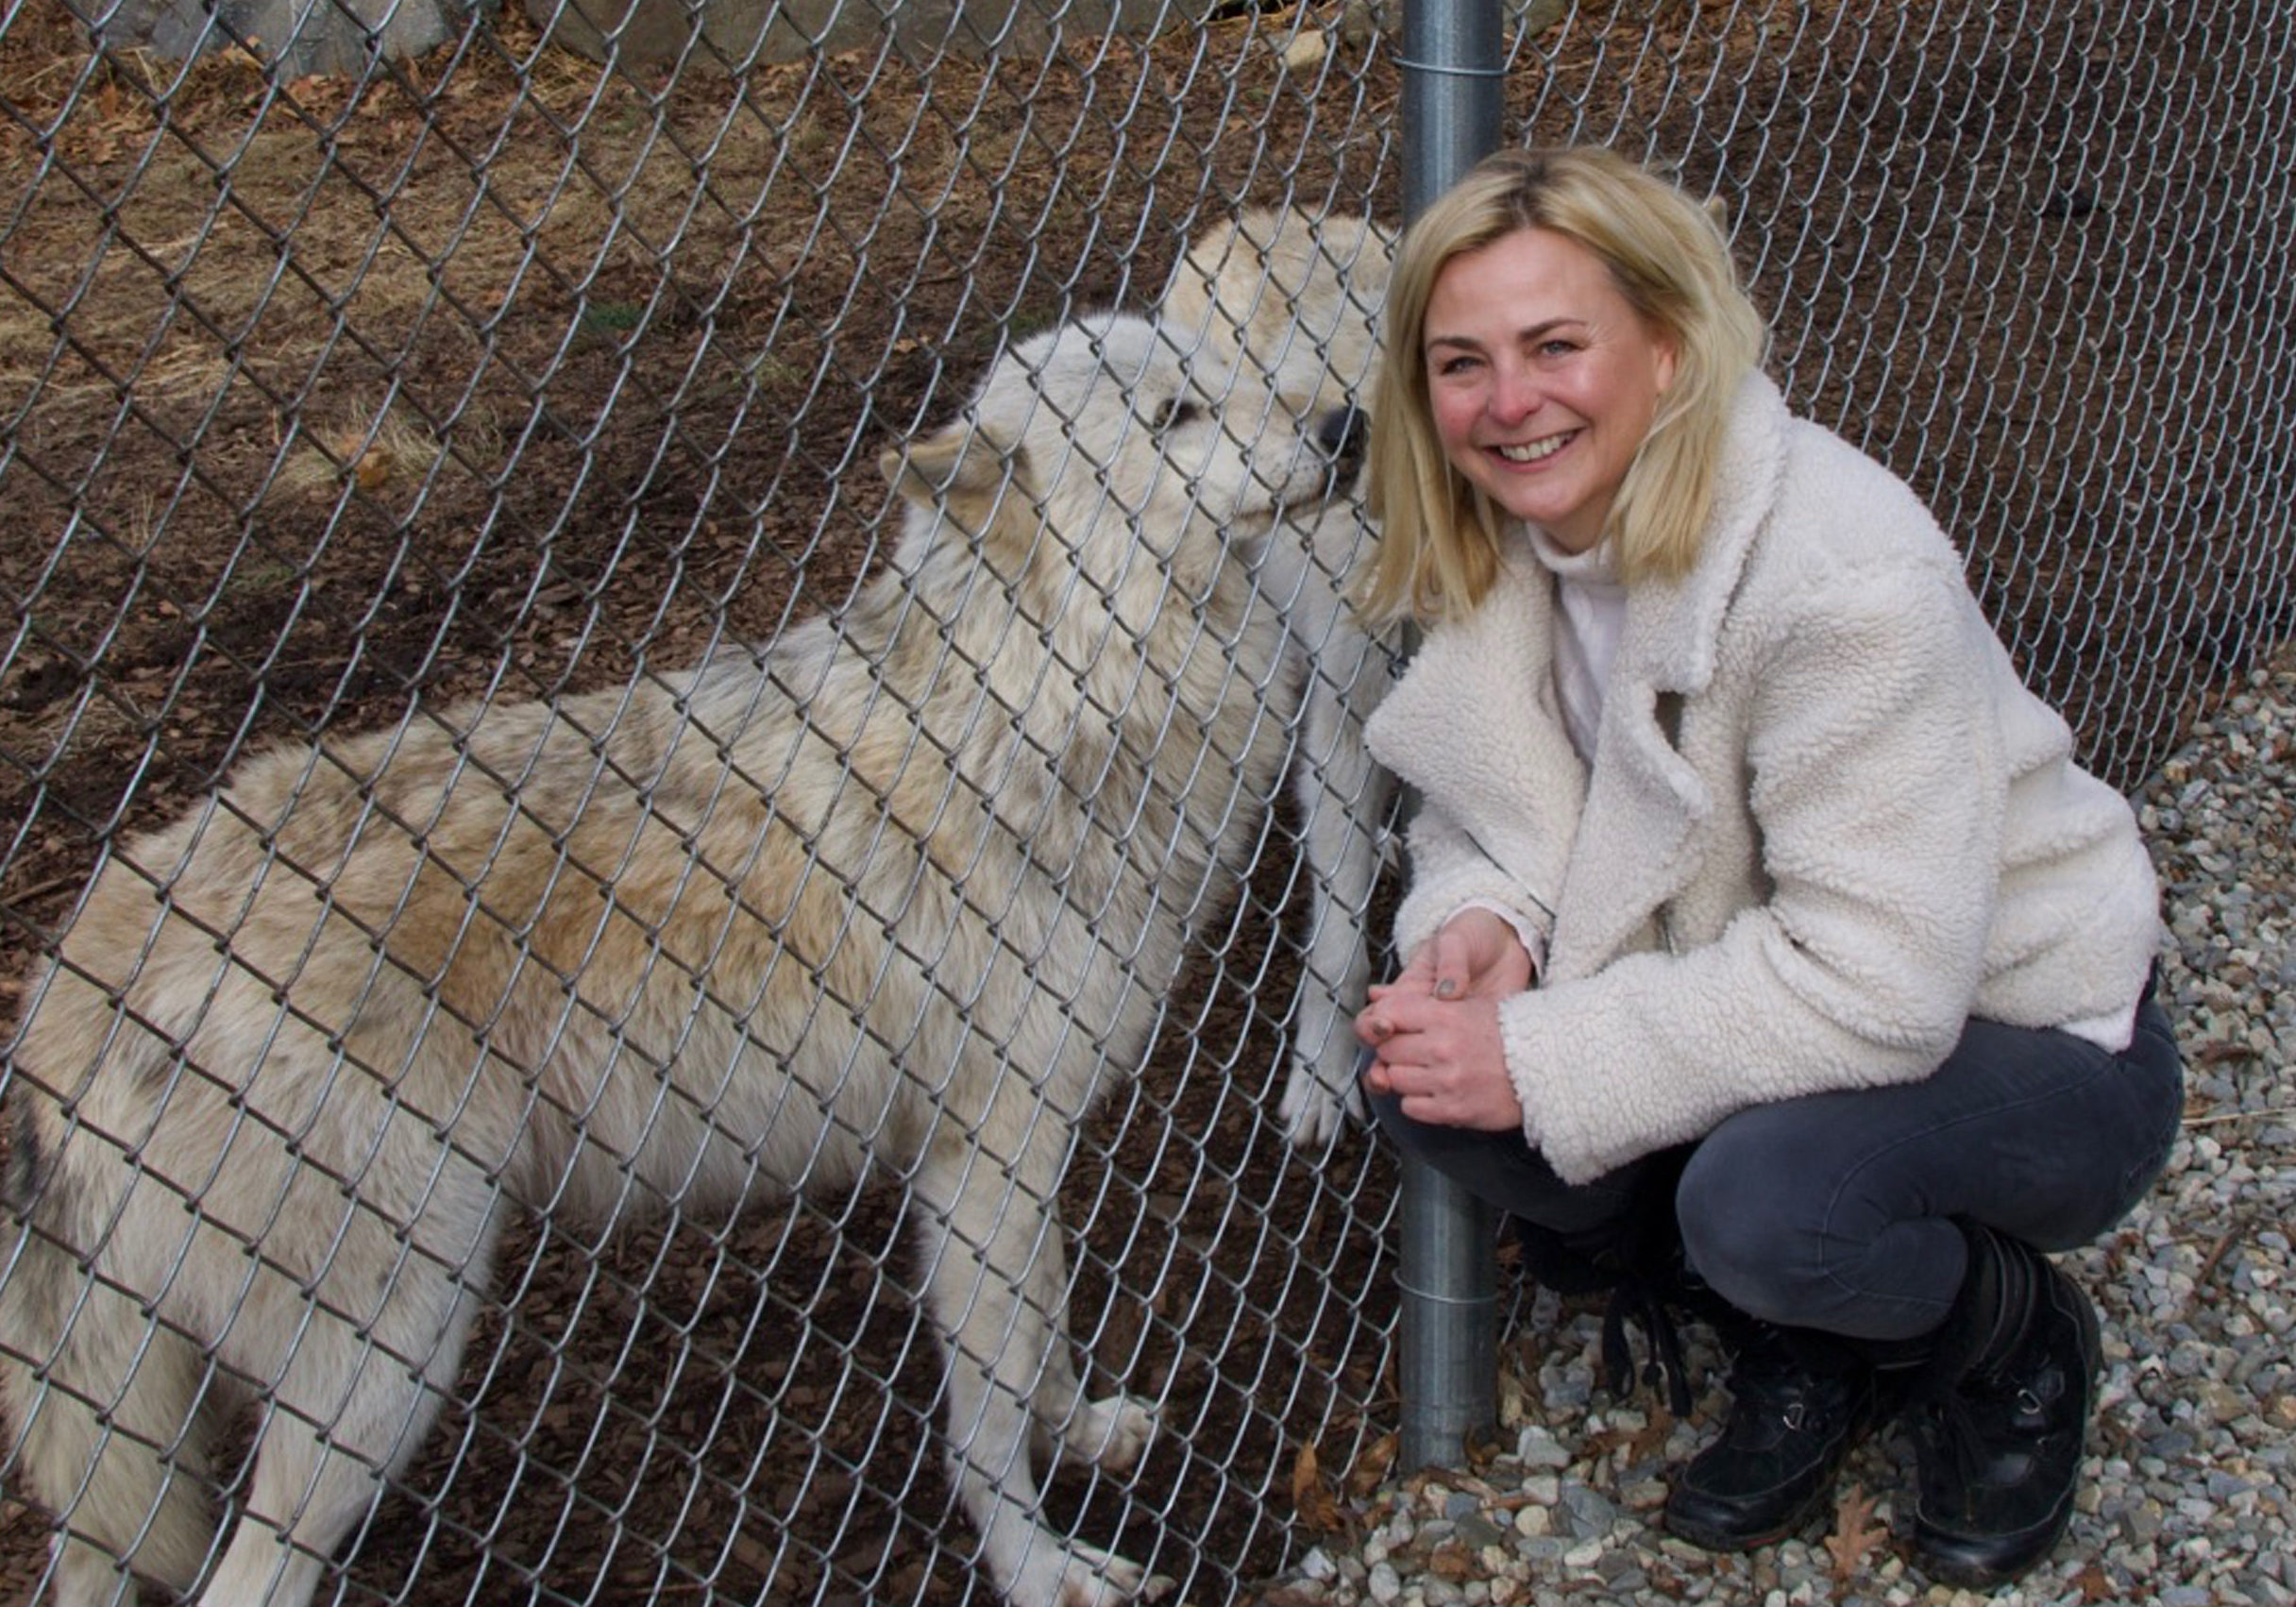 TV presenter Philippa Forrester says wolves are no concern – they won’t attack humans, just stare at you